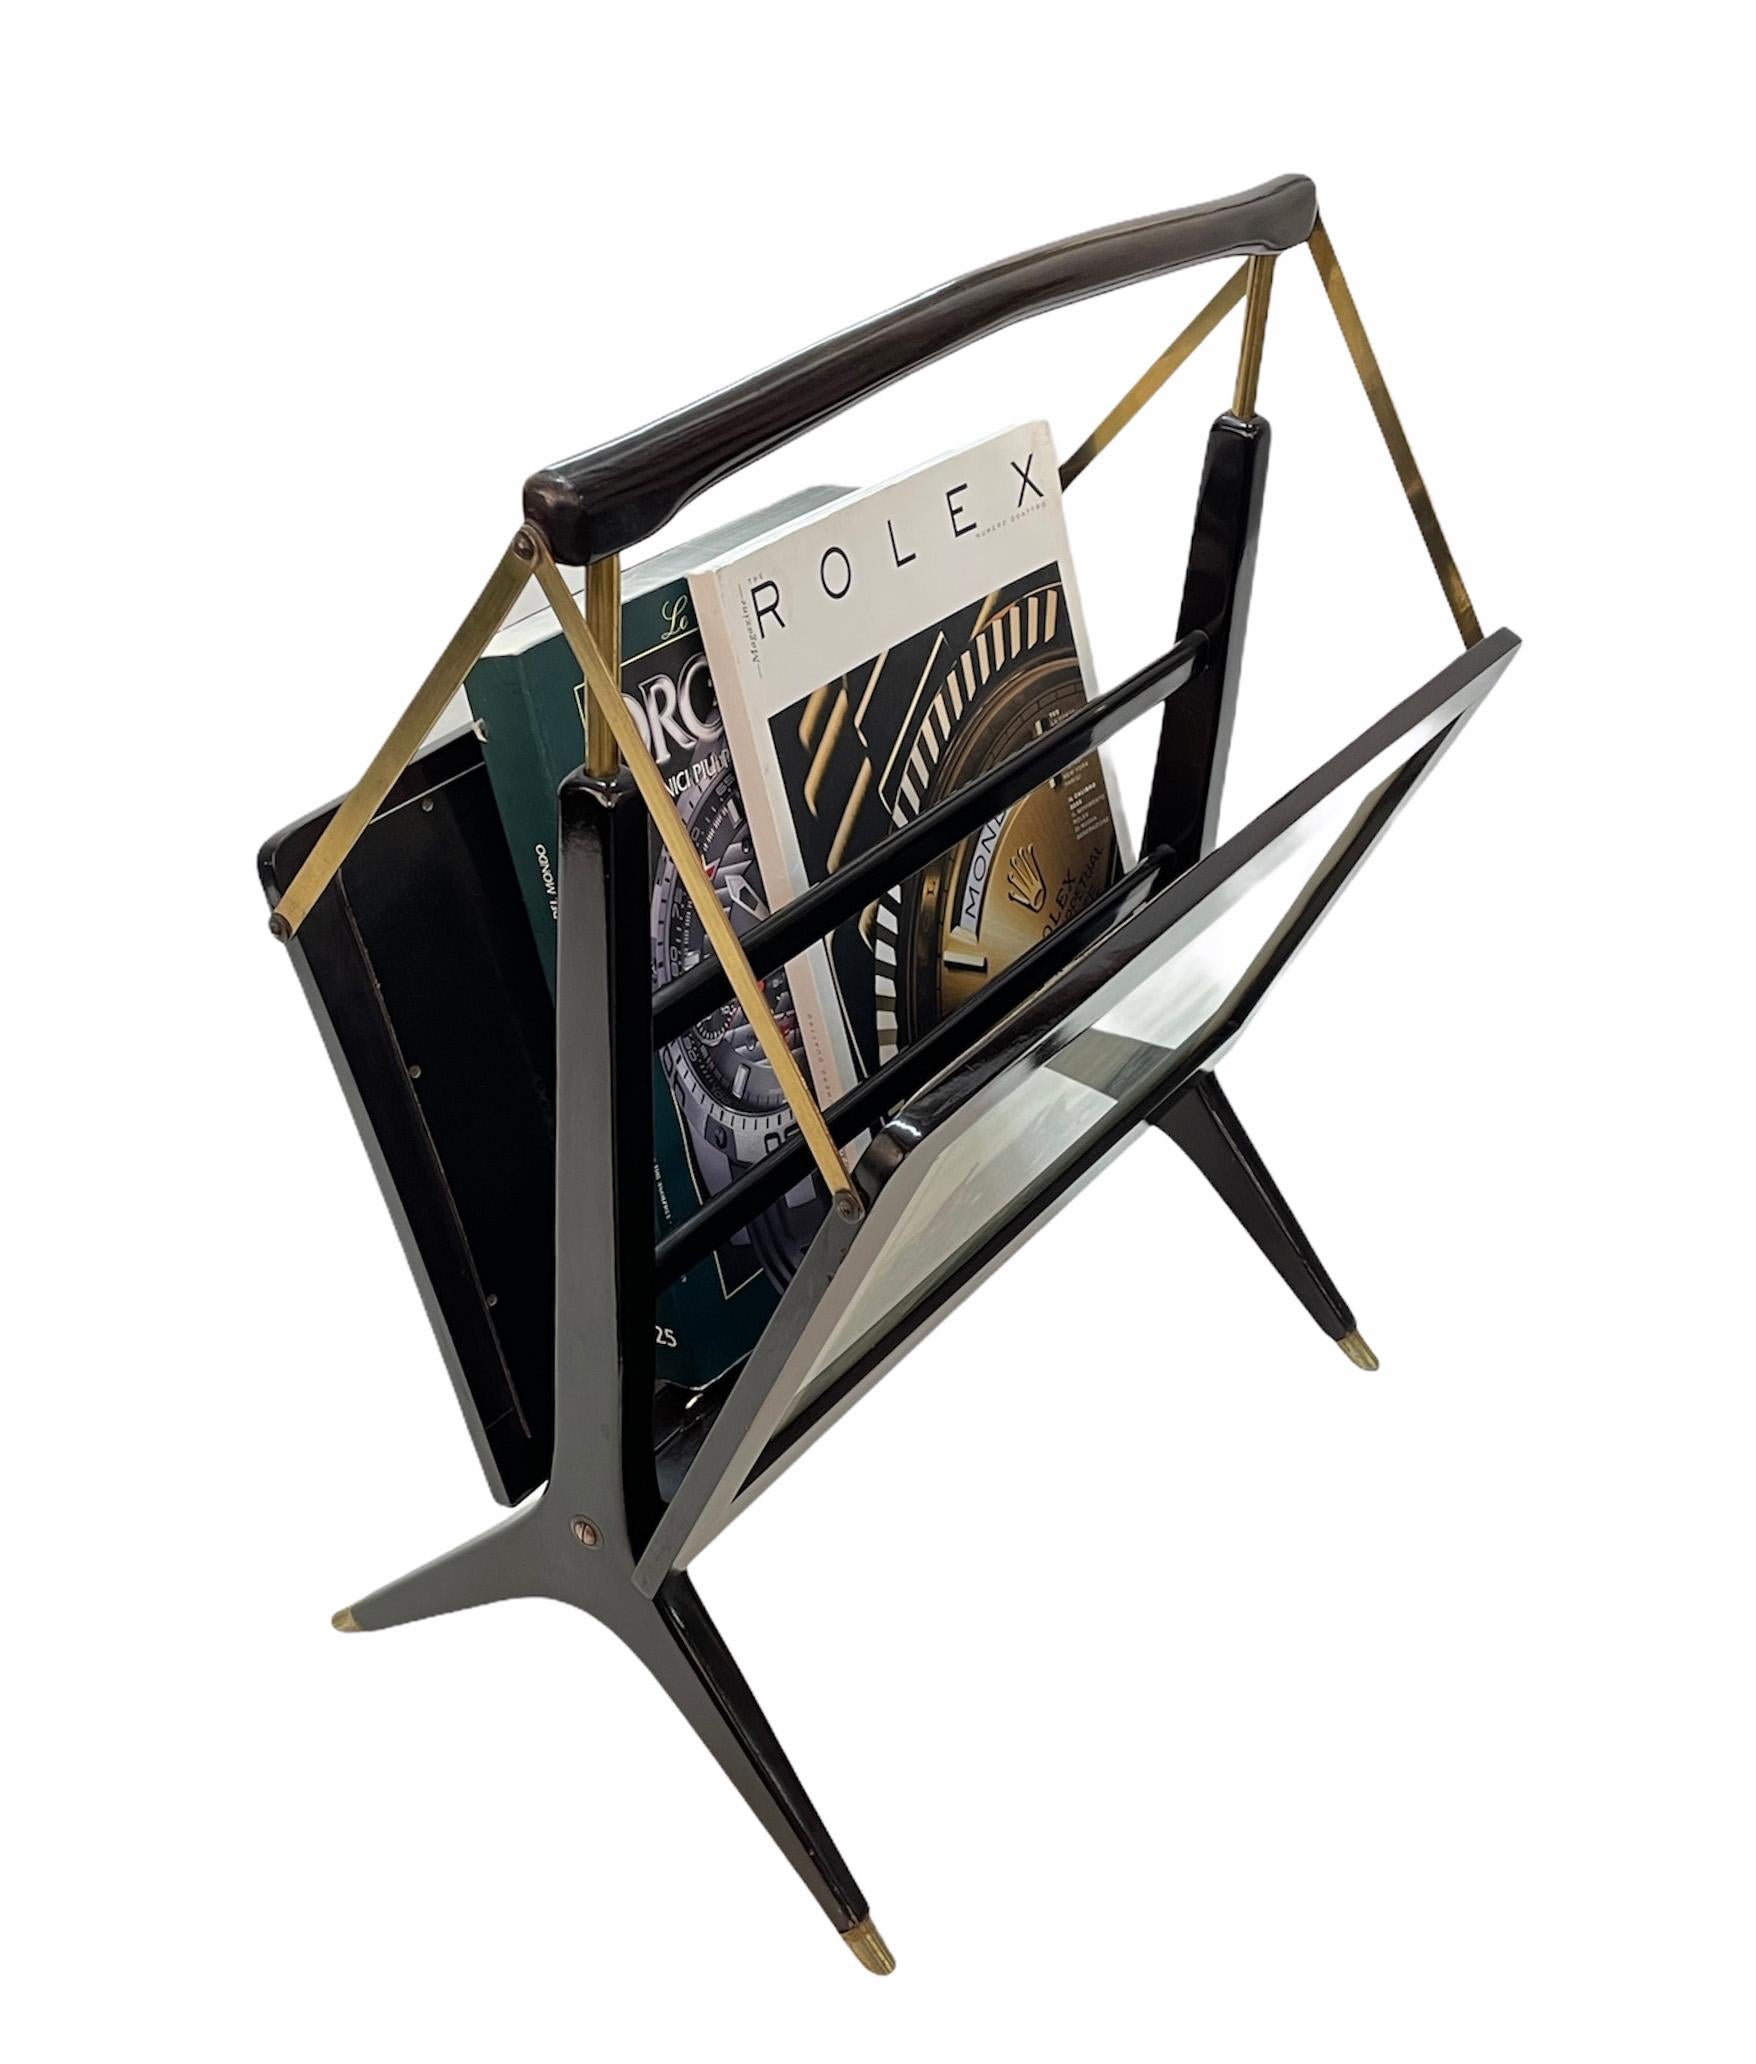 Wonderful midcentury lacquered wood magazine rack. It was designed by Cesare Lacca produced in Milan, Italy, during the 1950s.

It is both elegant and functional, as wood and brass are perfectly mixed creating an astonishing midcentury balance and